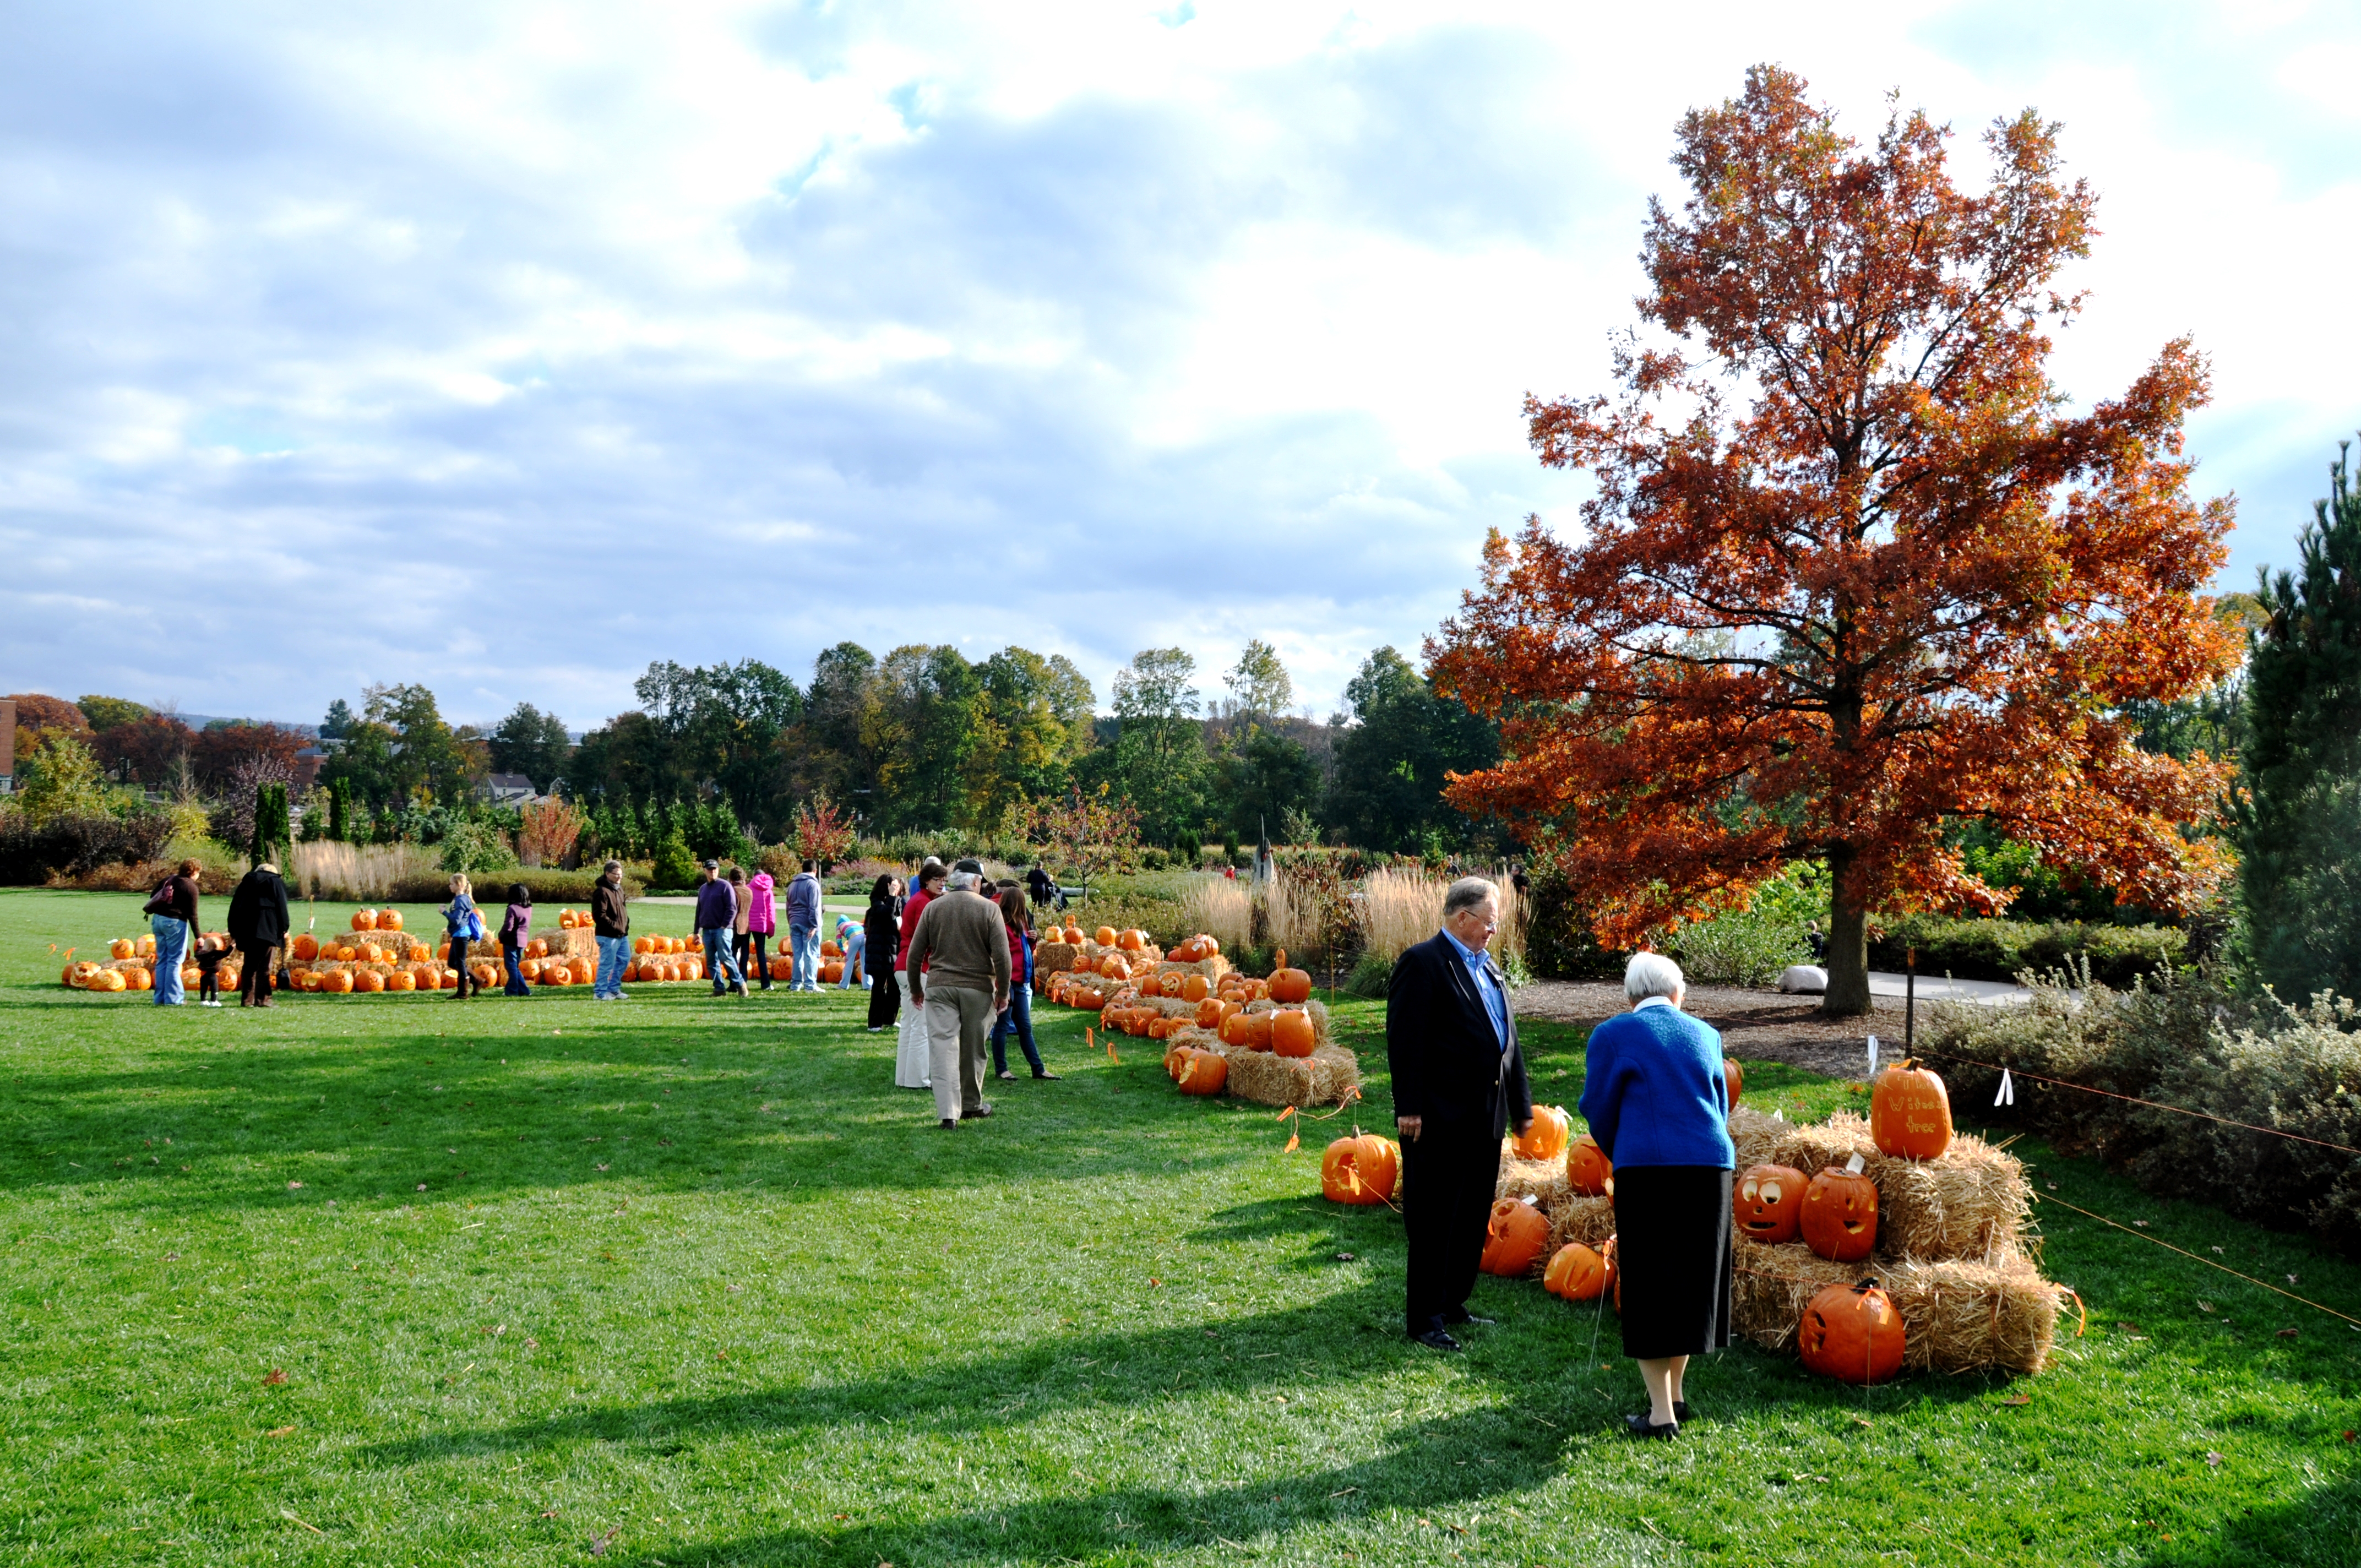 visitors look at pumpkin display in a large field